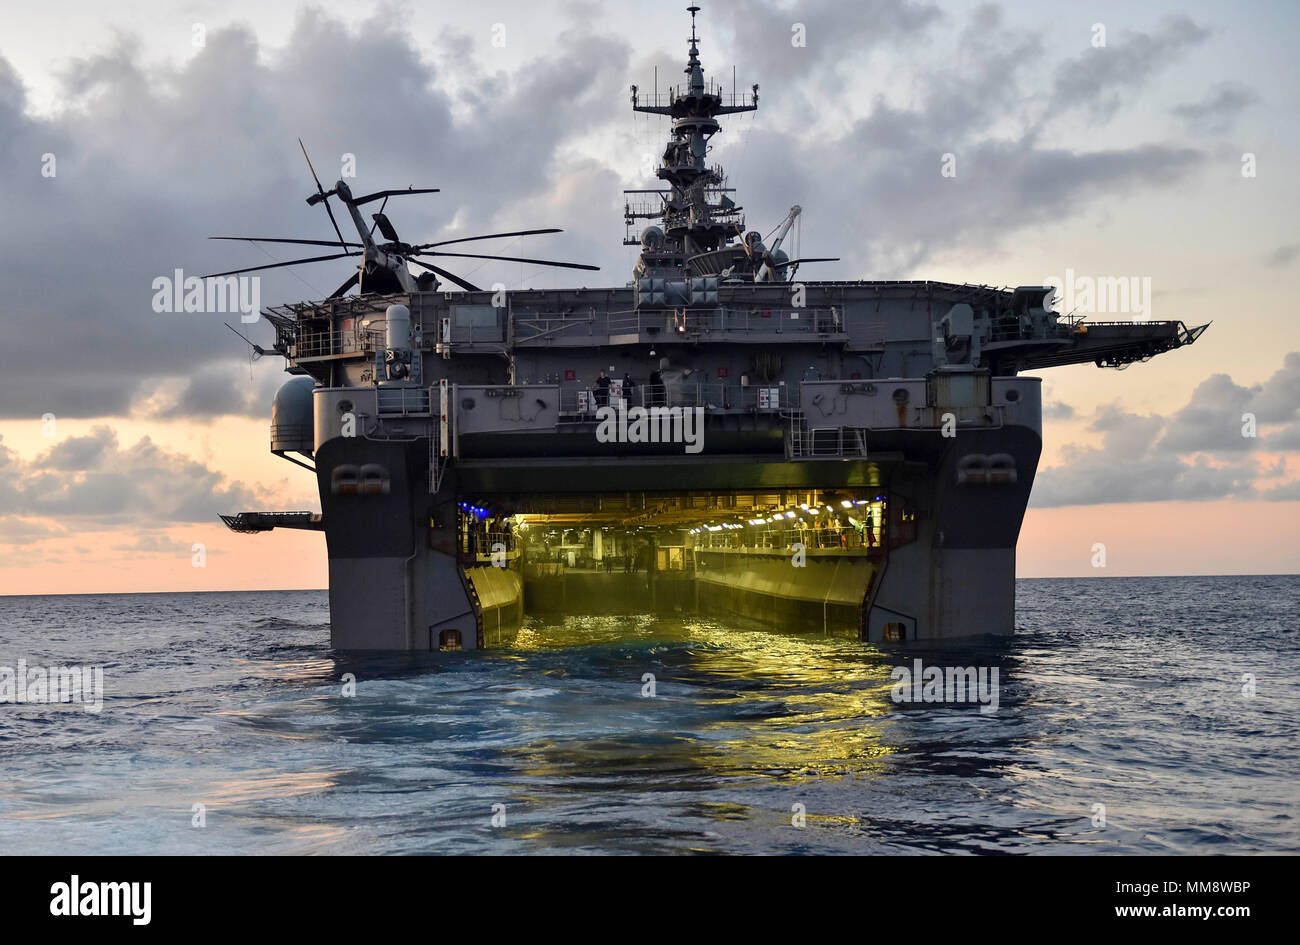 170915-N-PC620-0009    ATLANTIC OCEAN (Sept. 15, 2017) The amphibious assault ship USS Iwo Jima (LHD 7) as seen from Landing Craft Unit 1643, attached to Assault Craft Unit (ACU) 2, during humanitarian assistance efforts following Hurricane Irma’s landfall in Key West, Florida. The Department of Defense is supporting Federal Emergency Management Agency, the lead agency, in helping those affixed by Hurricane Irma to minimize suffering and as one component of the overall whole-of-government response efforts.  (U.S. Navy photo by Mass Communication Specialist Seaman Michael Lehman/Released) Stock Photo